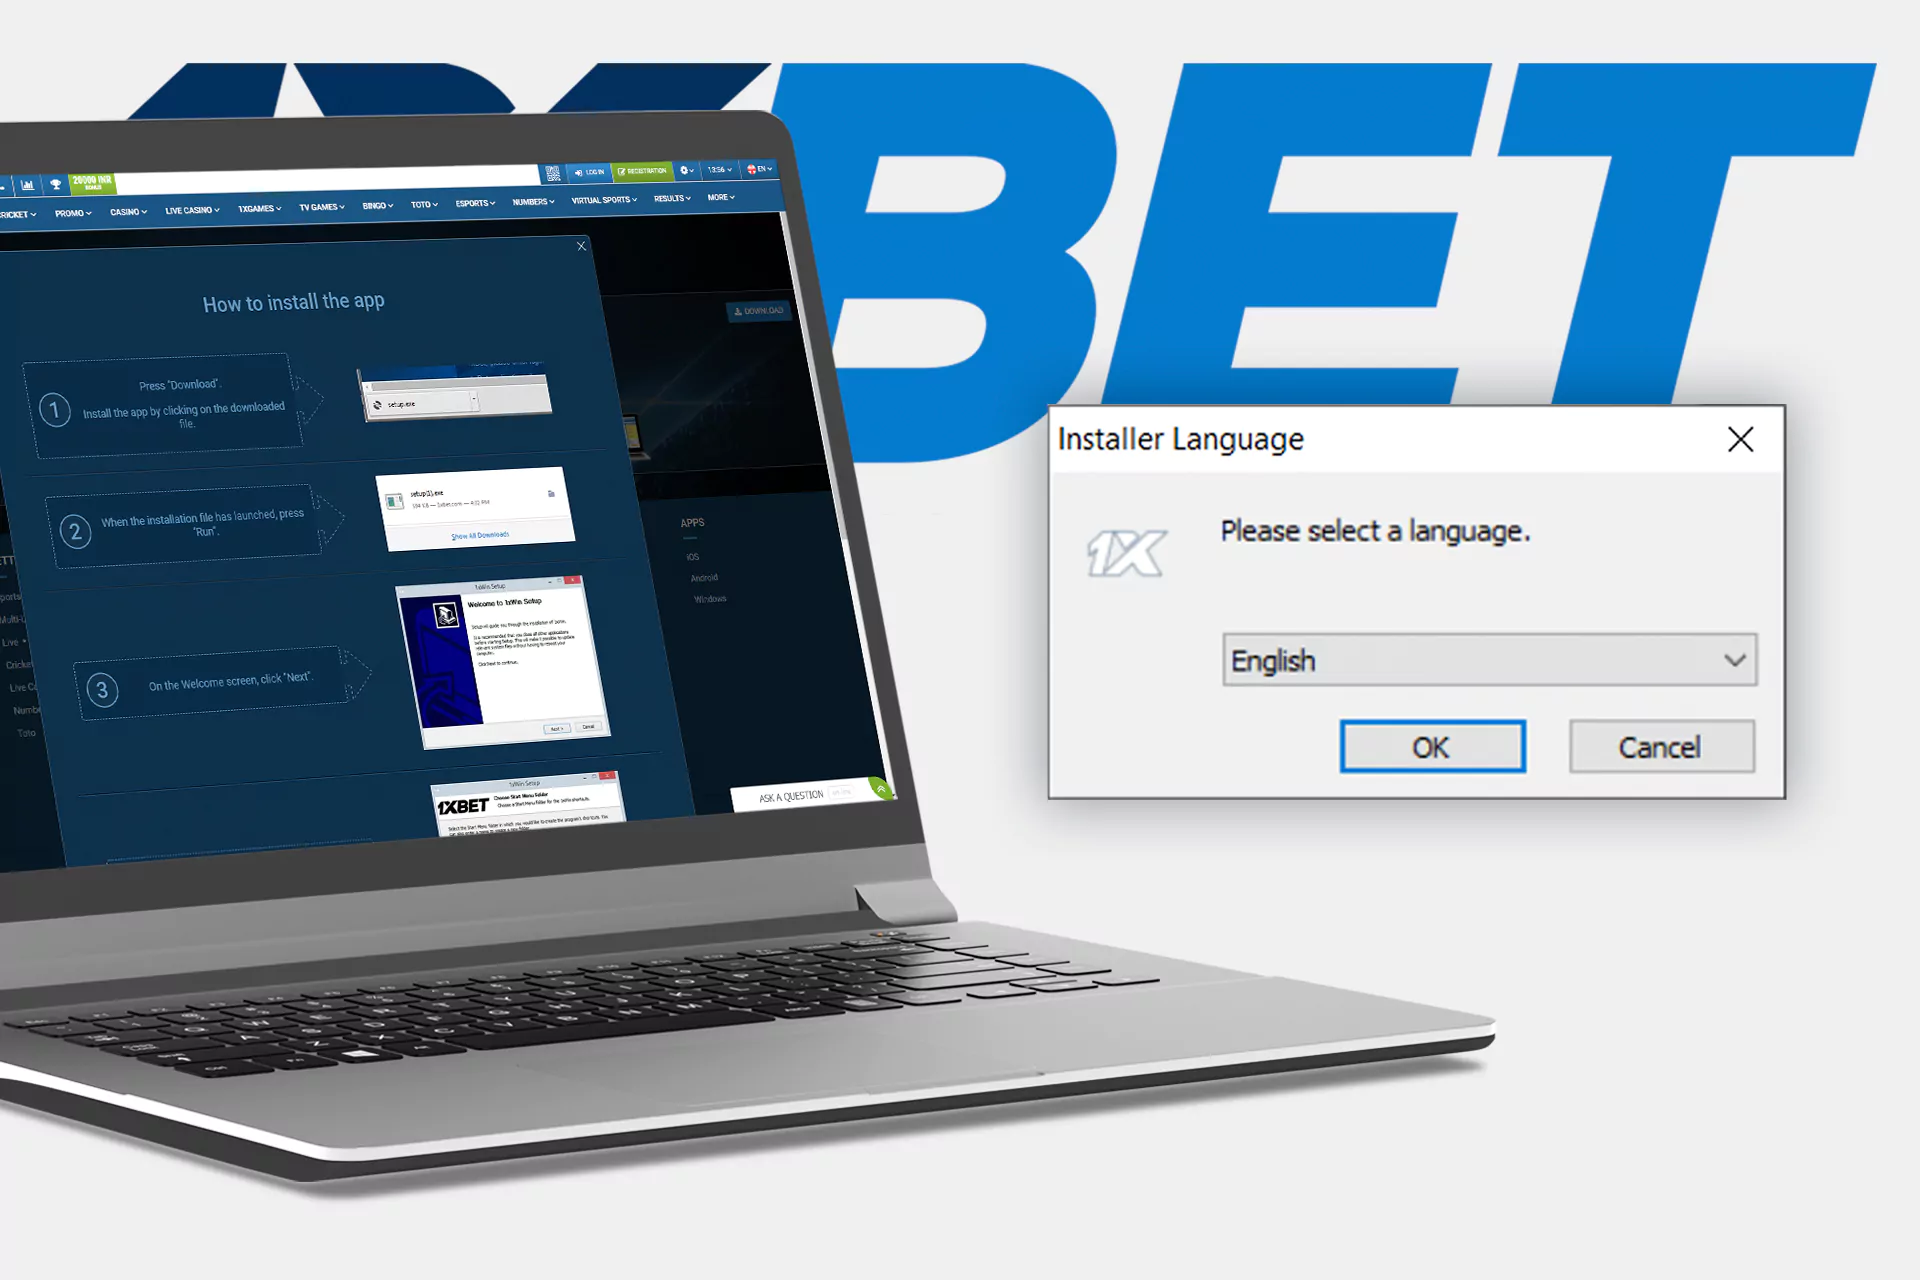 Install 1xBet for PC via the installation wizard.